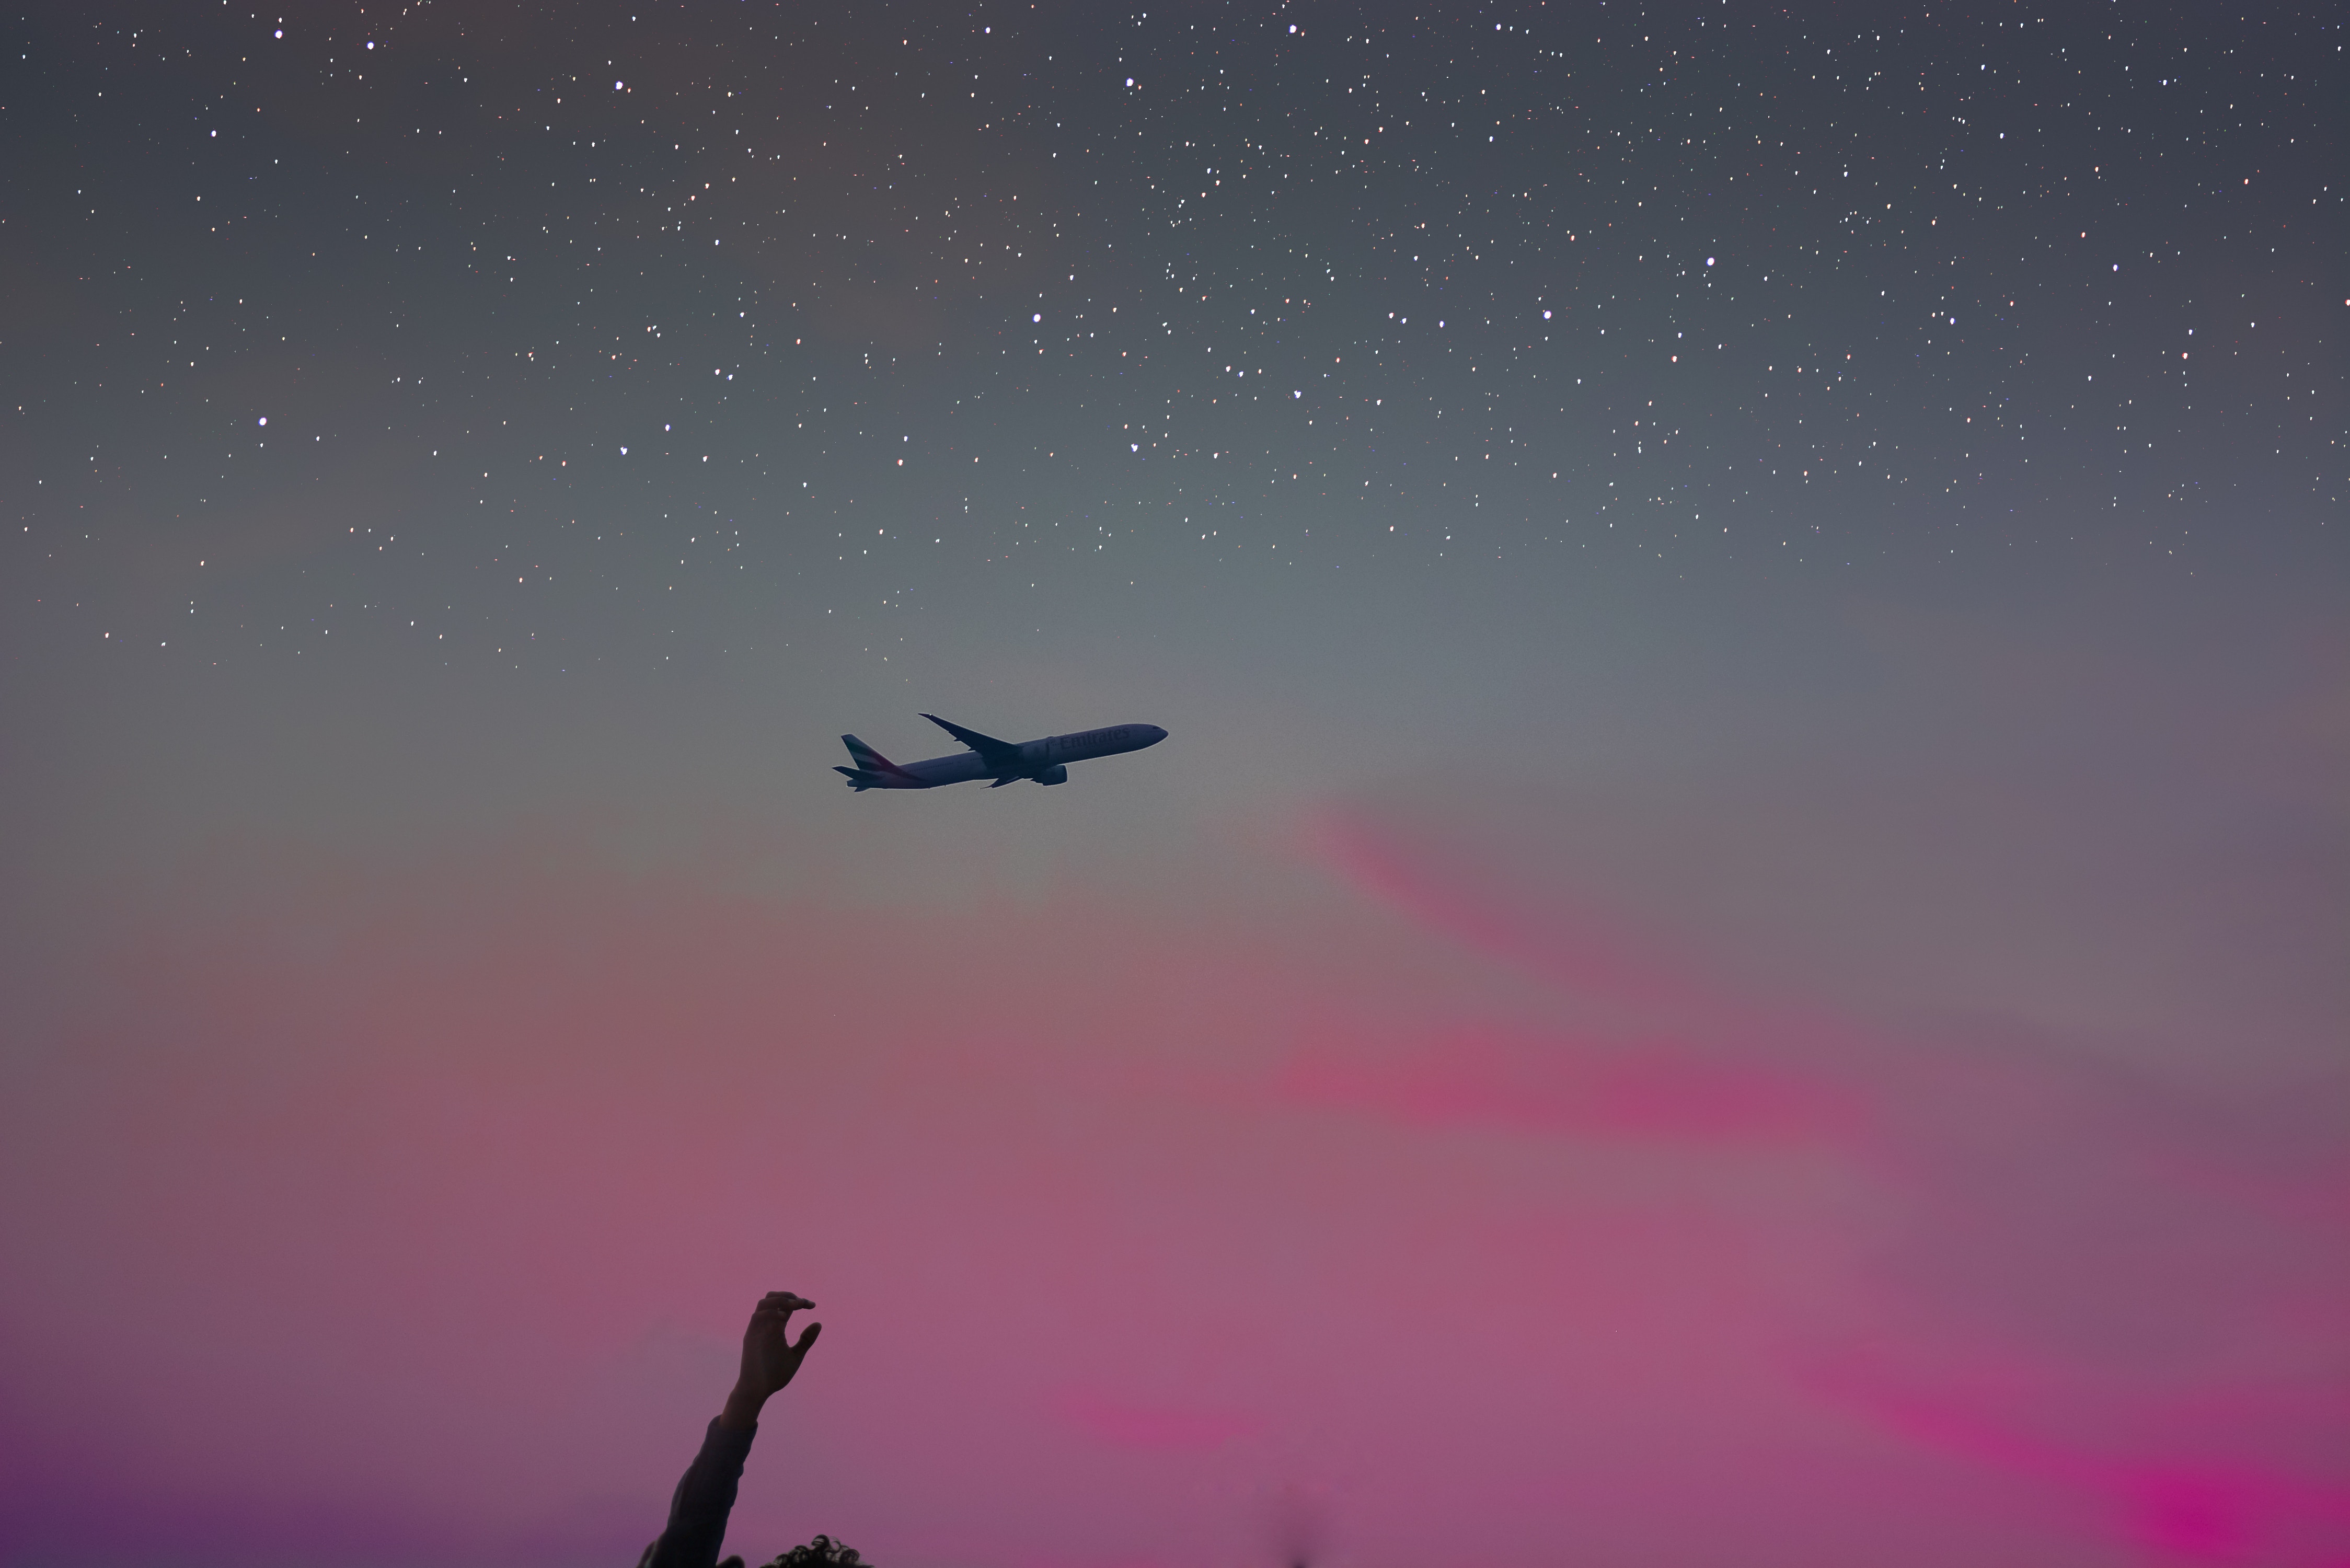 plane, inspiration, airplane, miscellaneous, sky, stars, hand, miscellanea, flight cell phone wallpapers